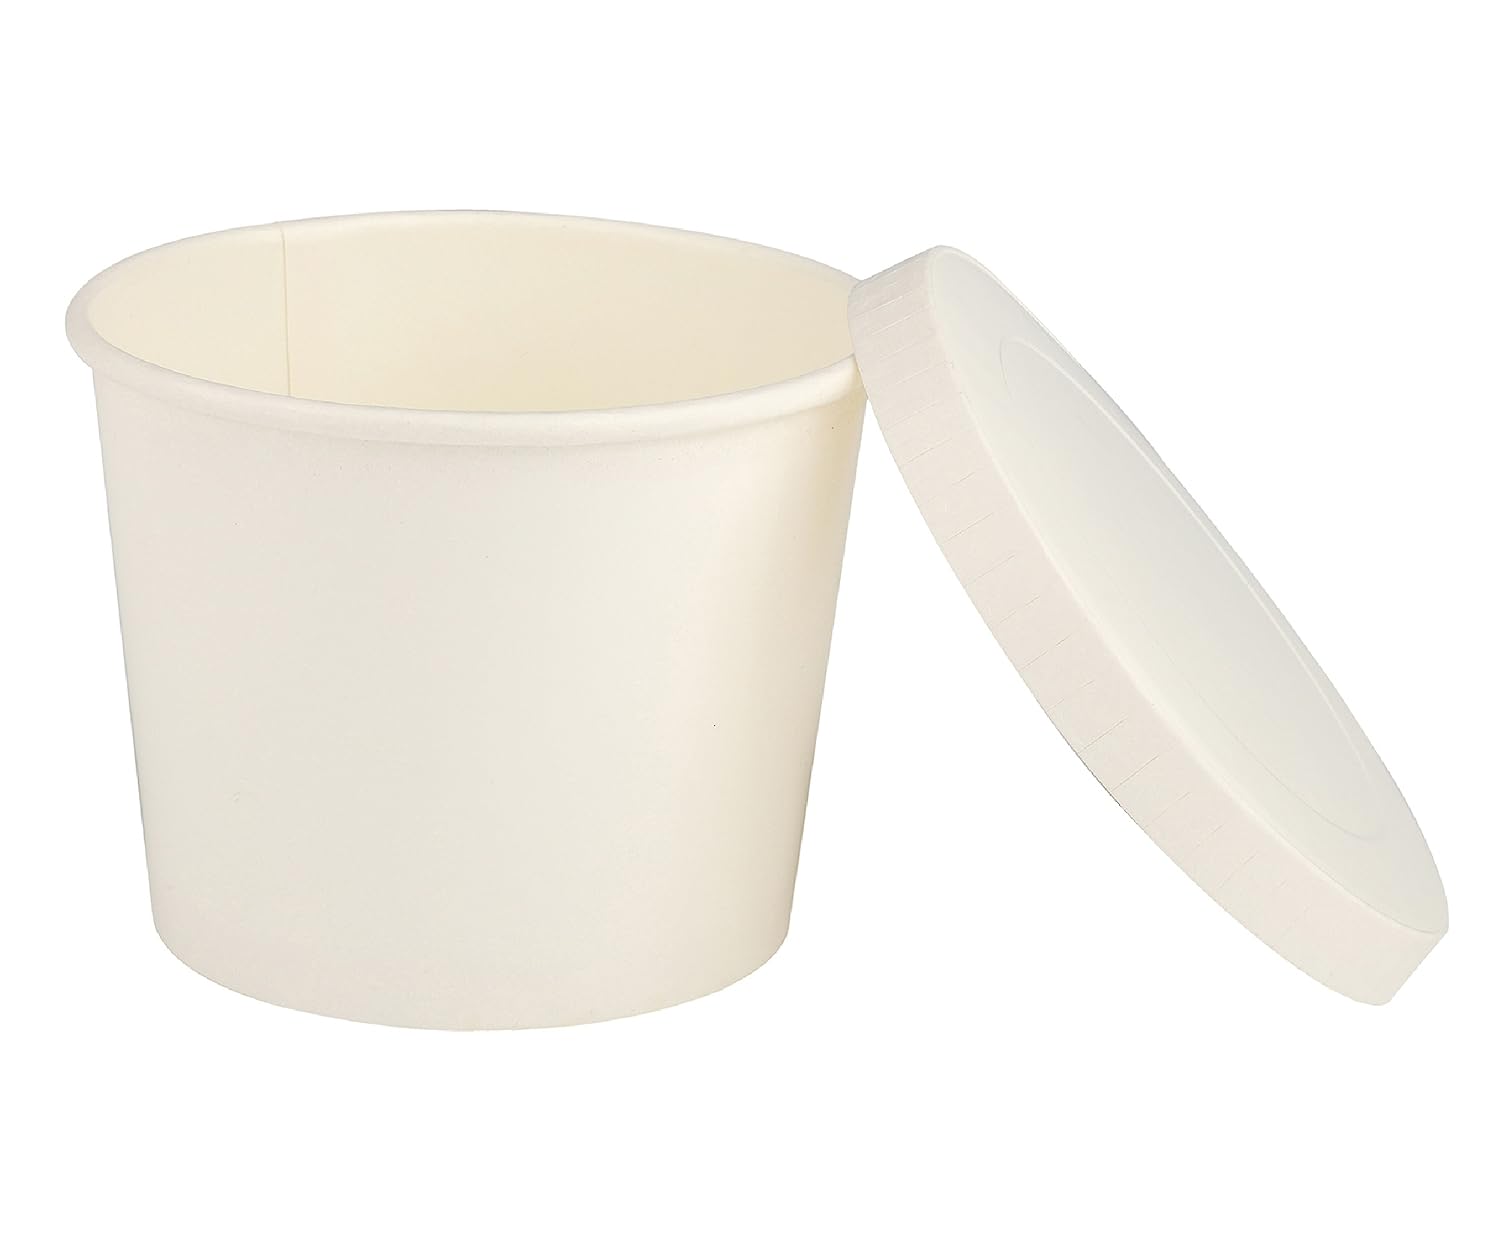 500 ml white Container